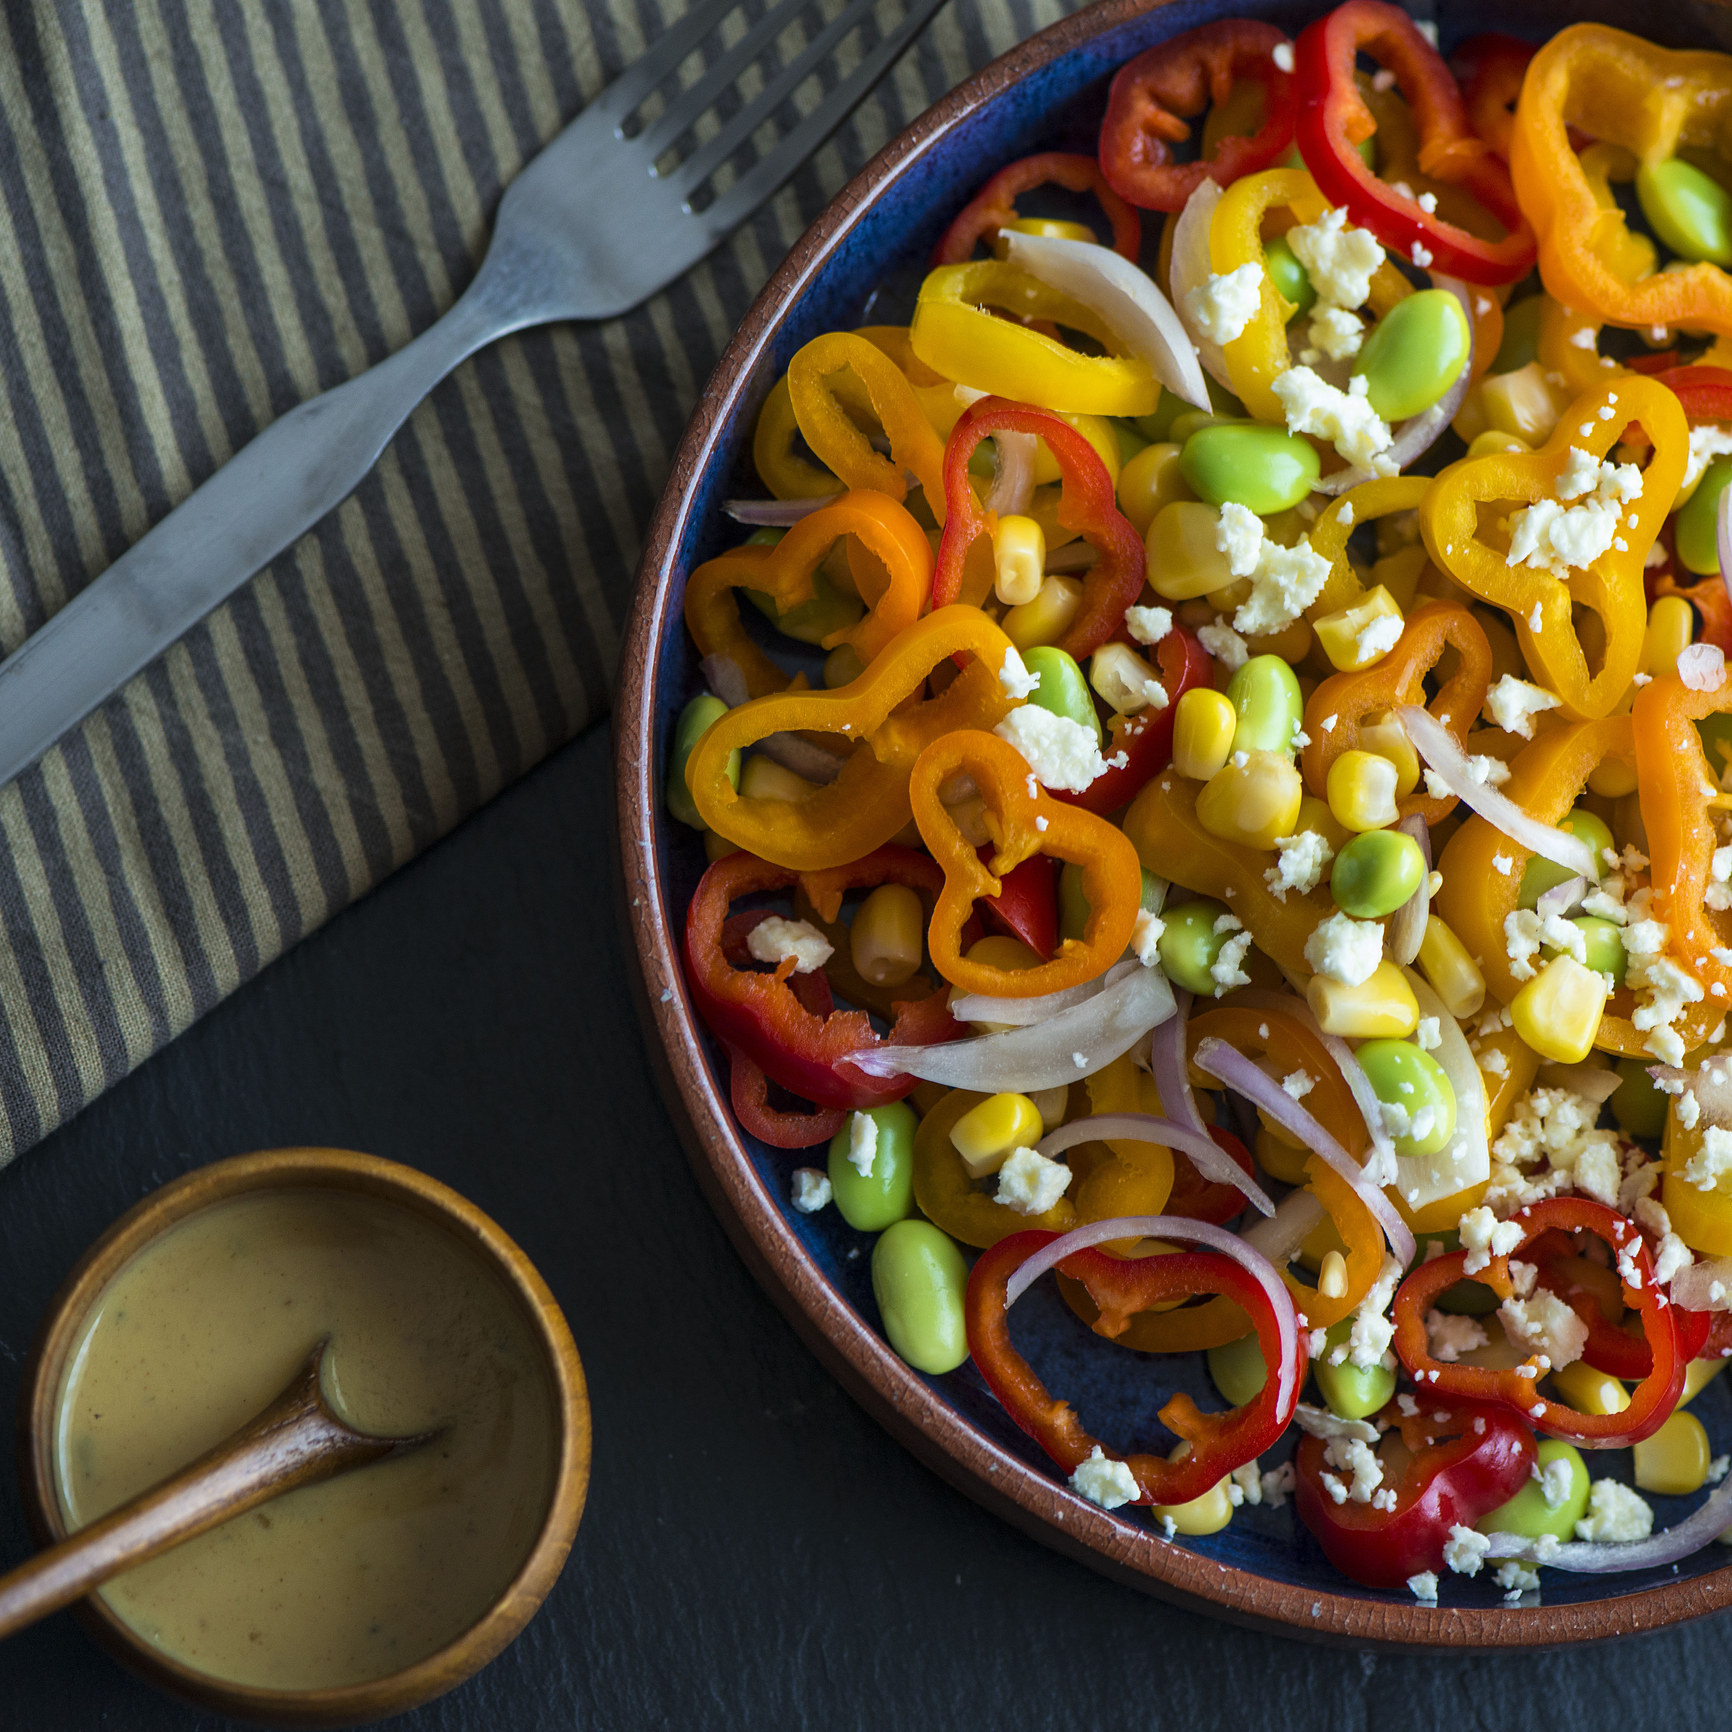 A bowl of salad topped with peppers, edamame, corn, and cheese.